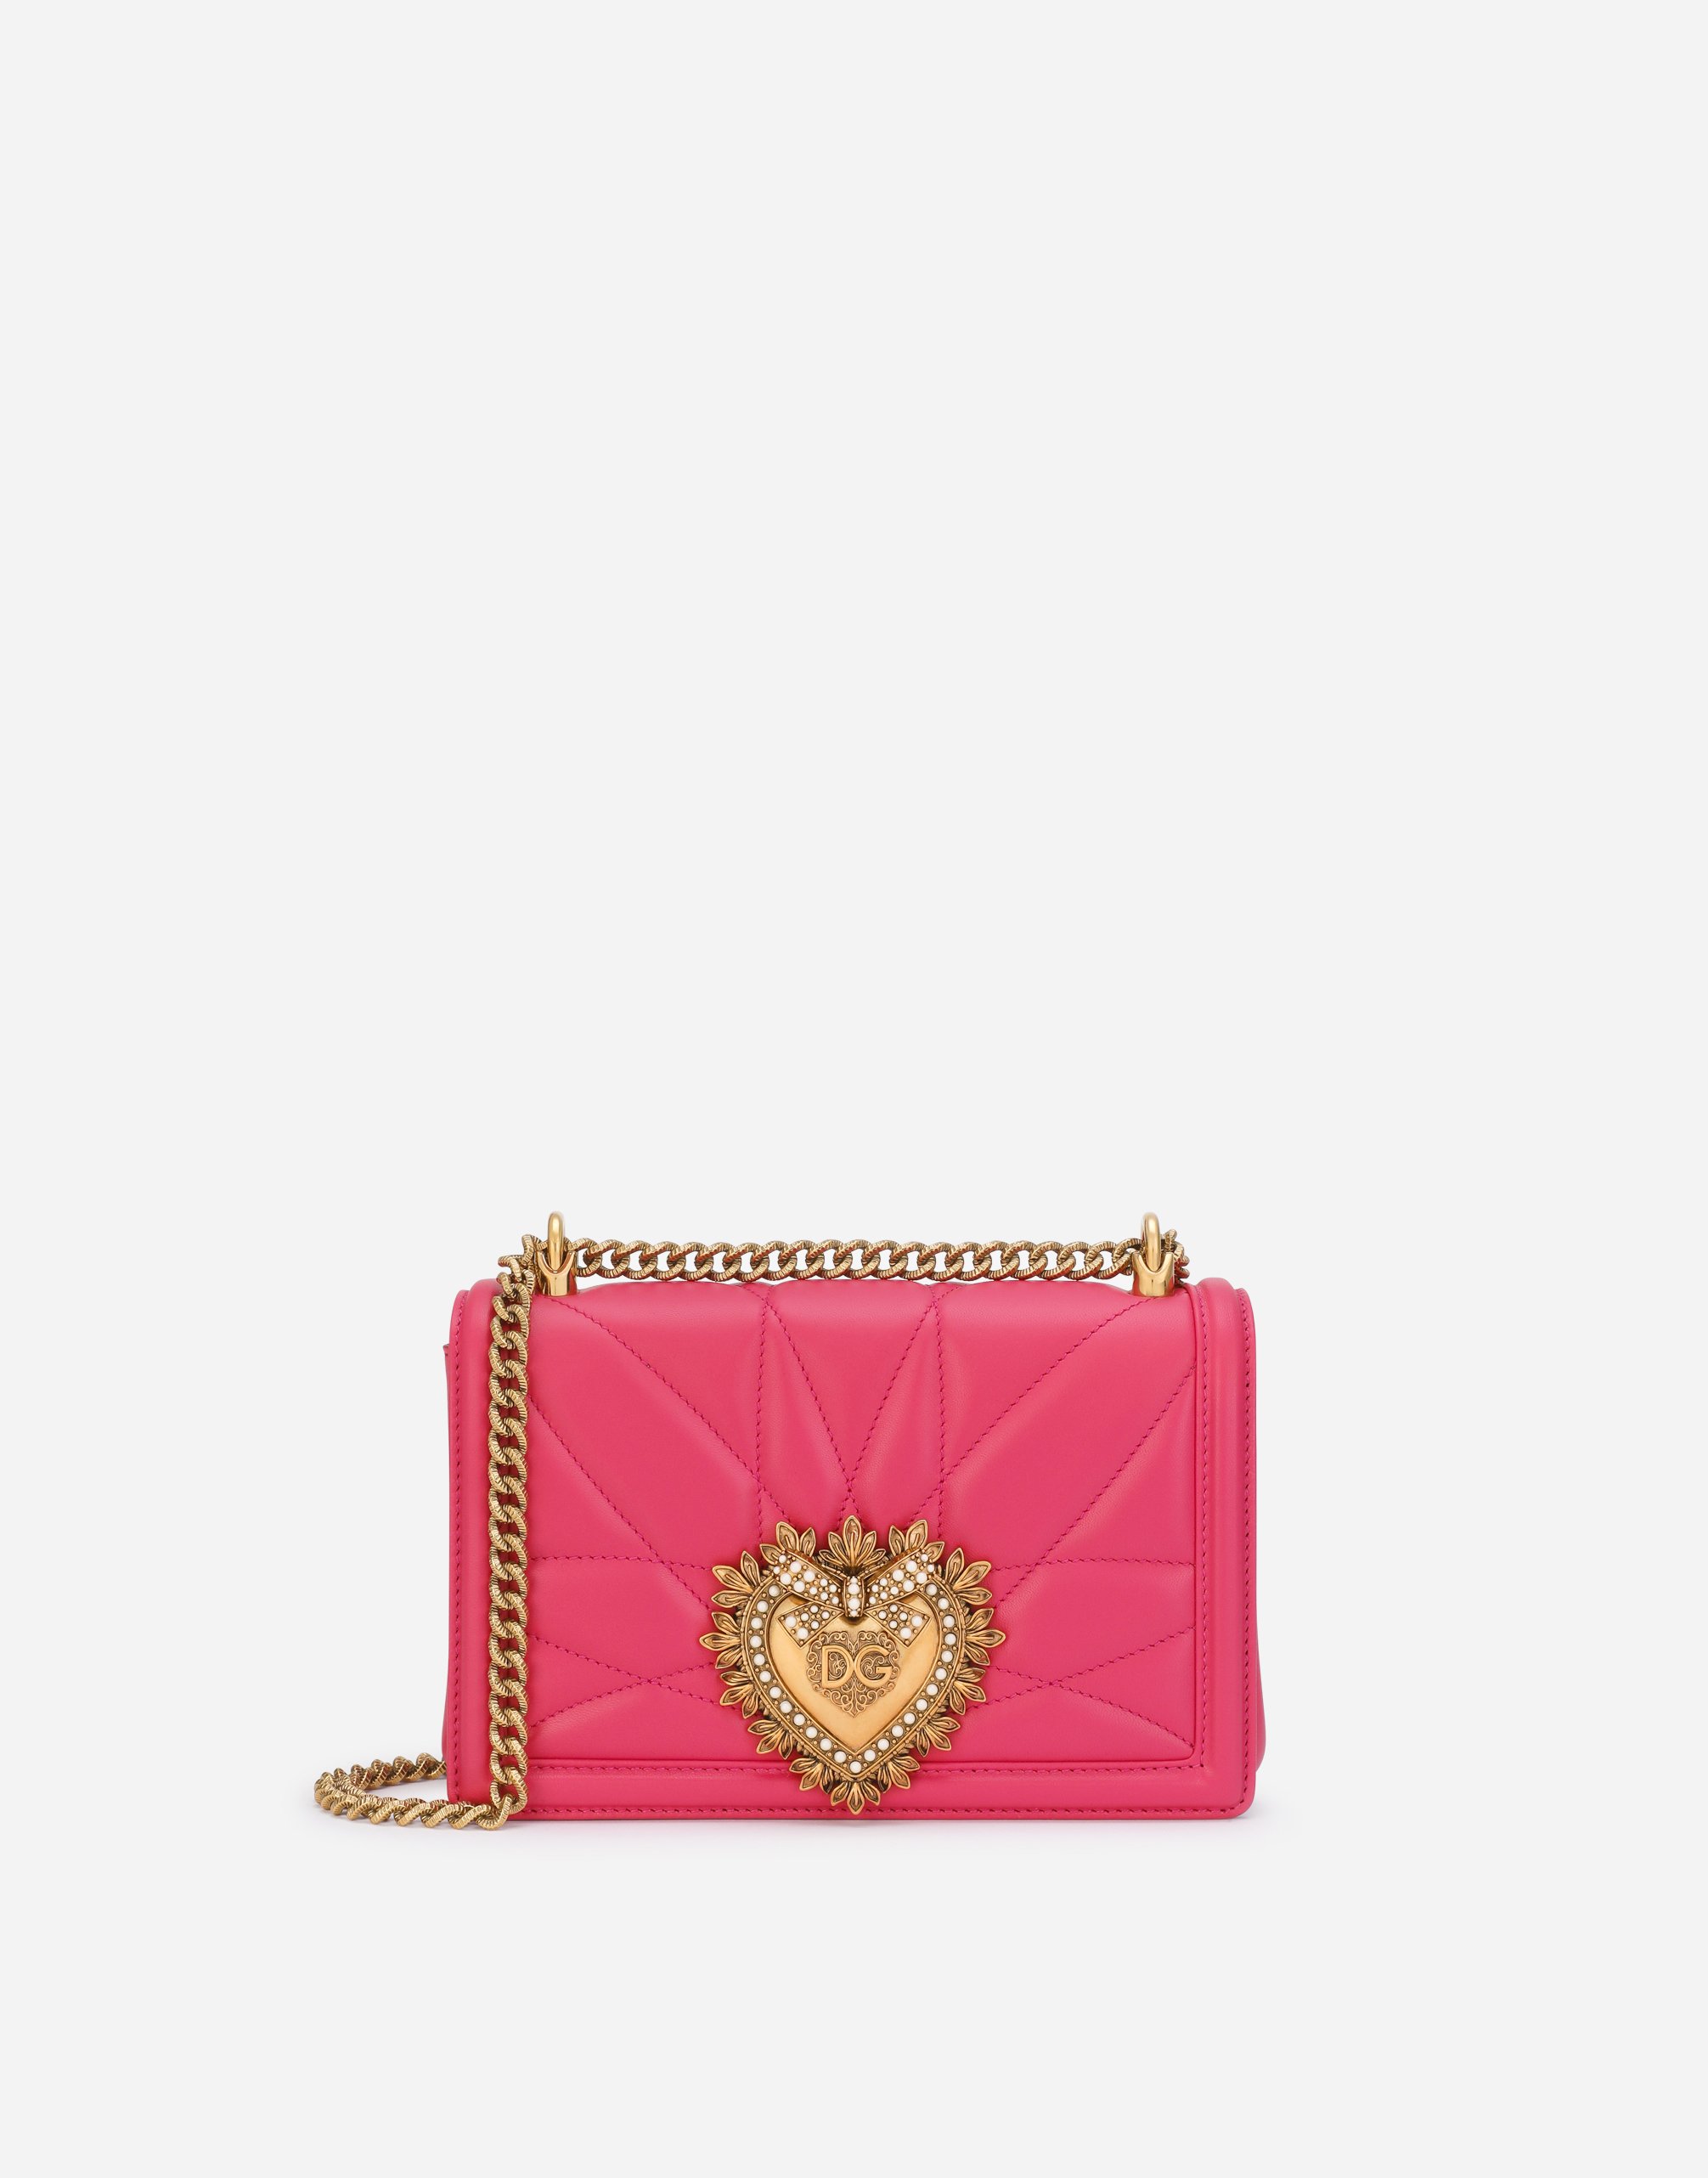 Medium Devotion crossbody bag in quilted nappa leather in Fuchsia